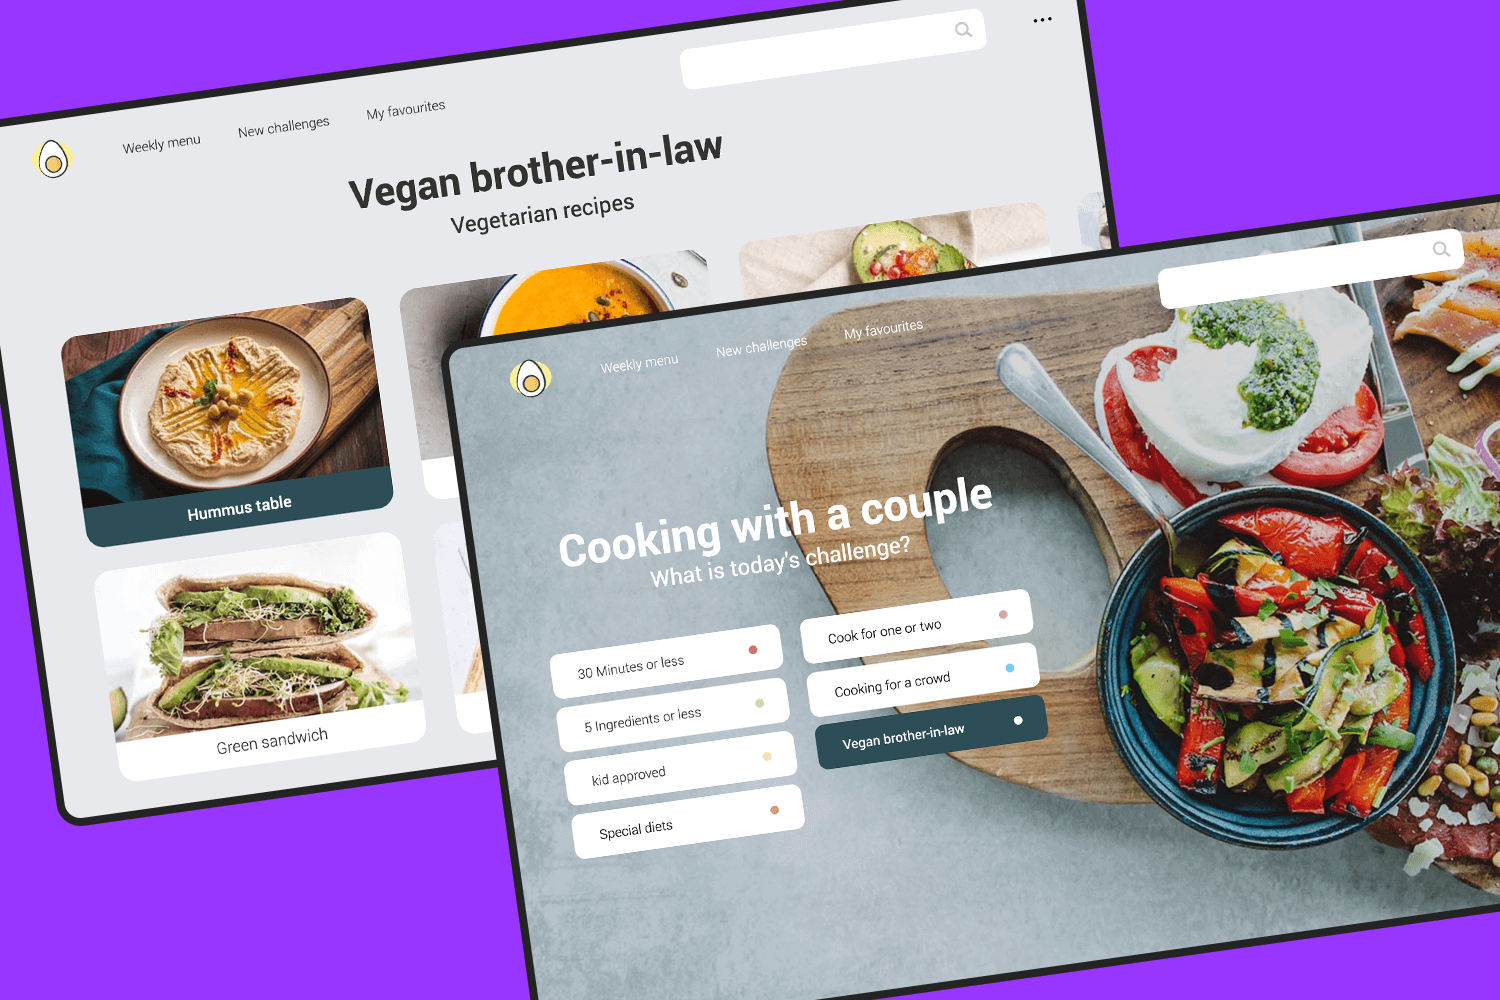 Vegan cooking app template with recipe categories and challenges